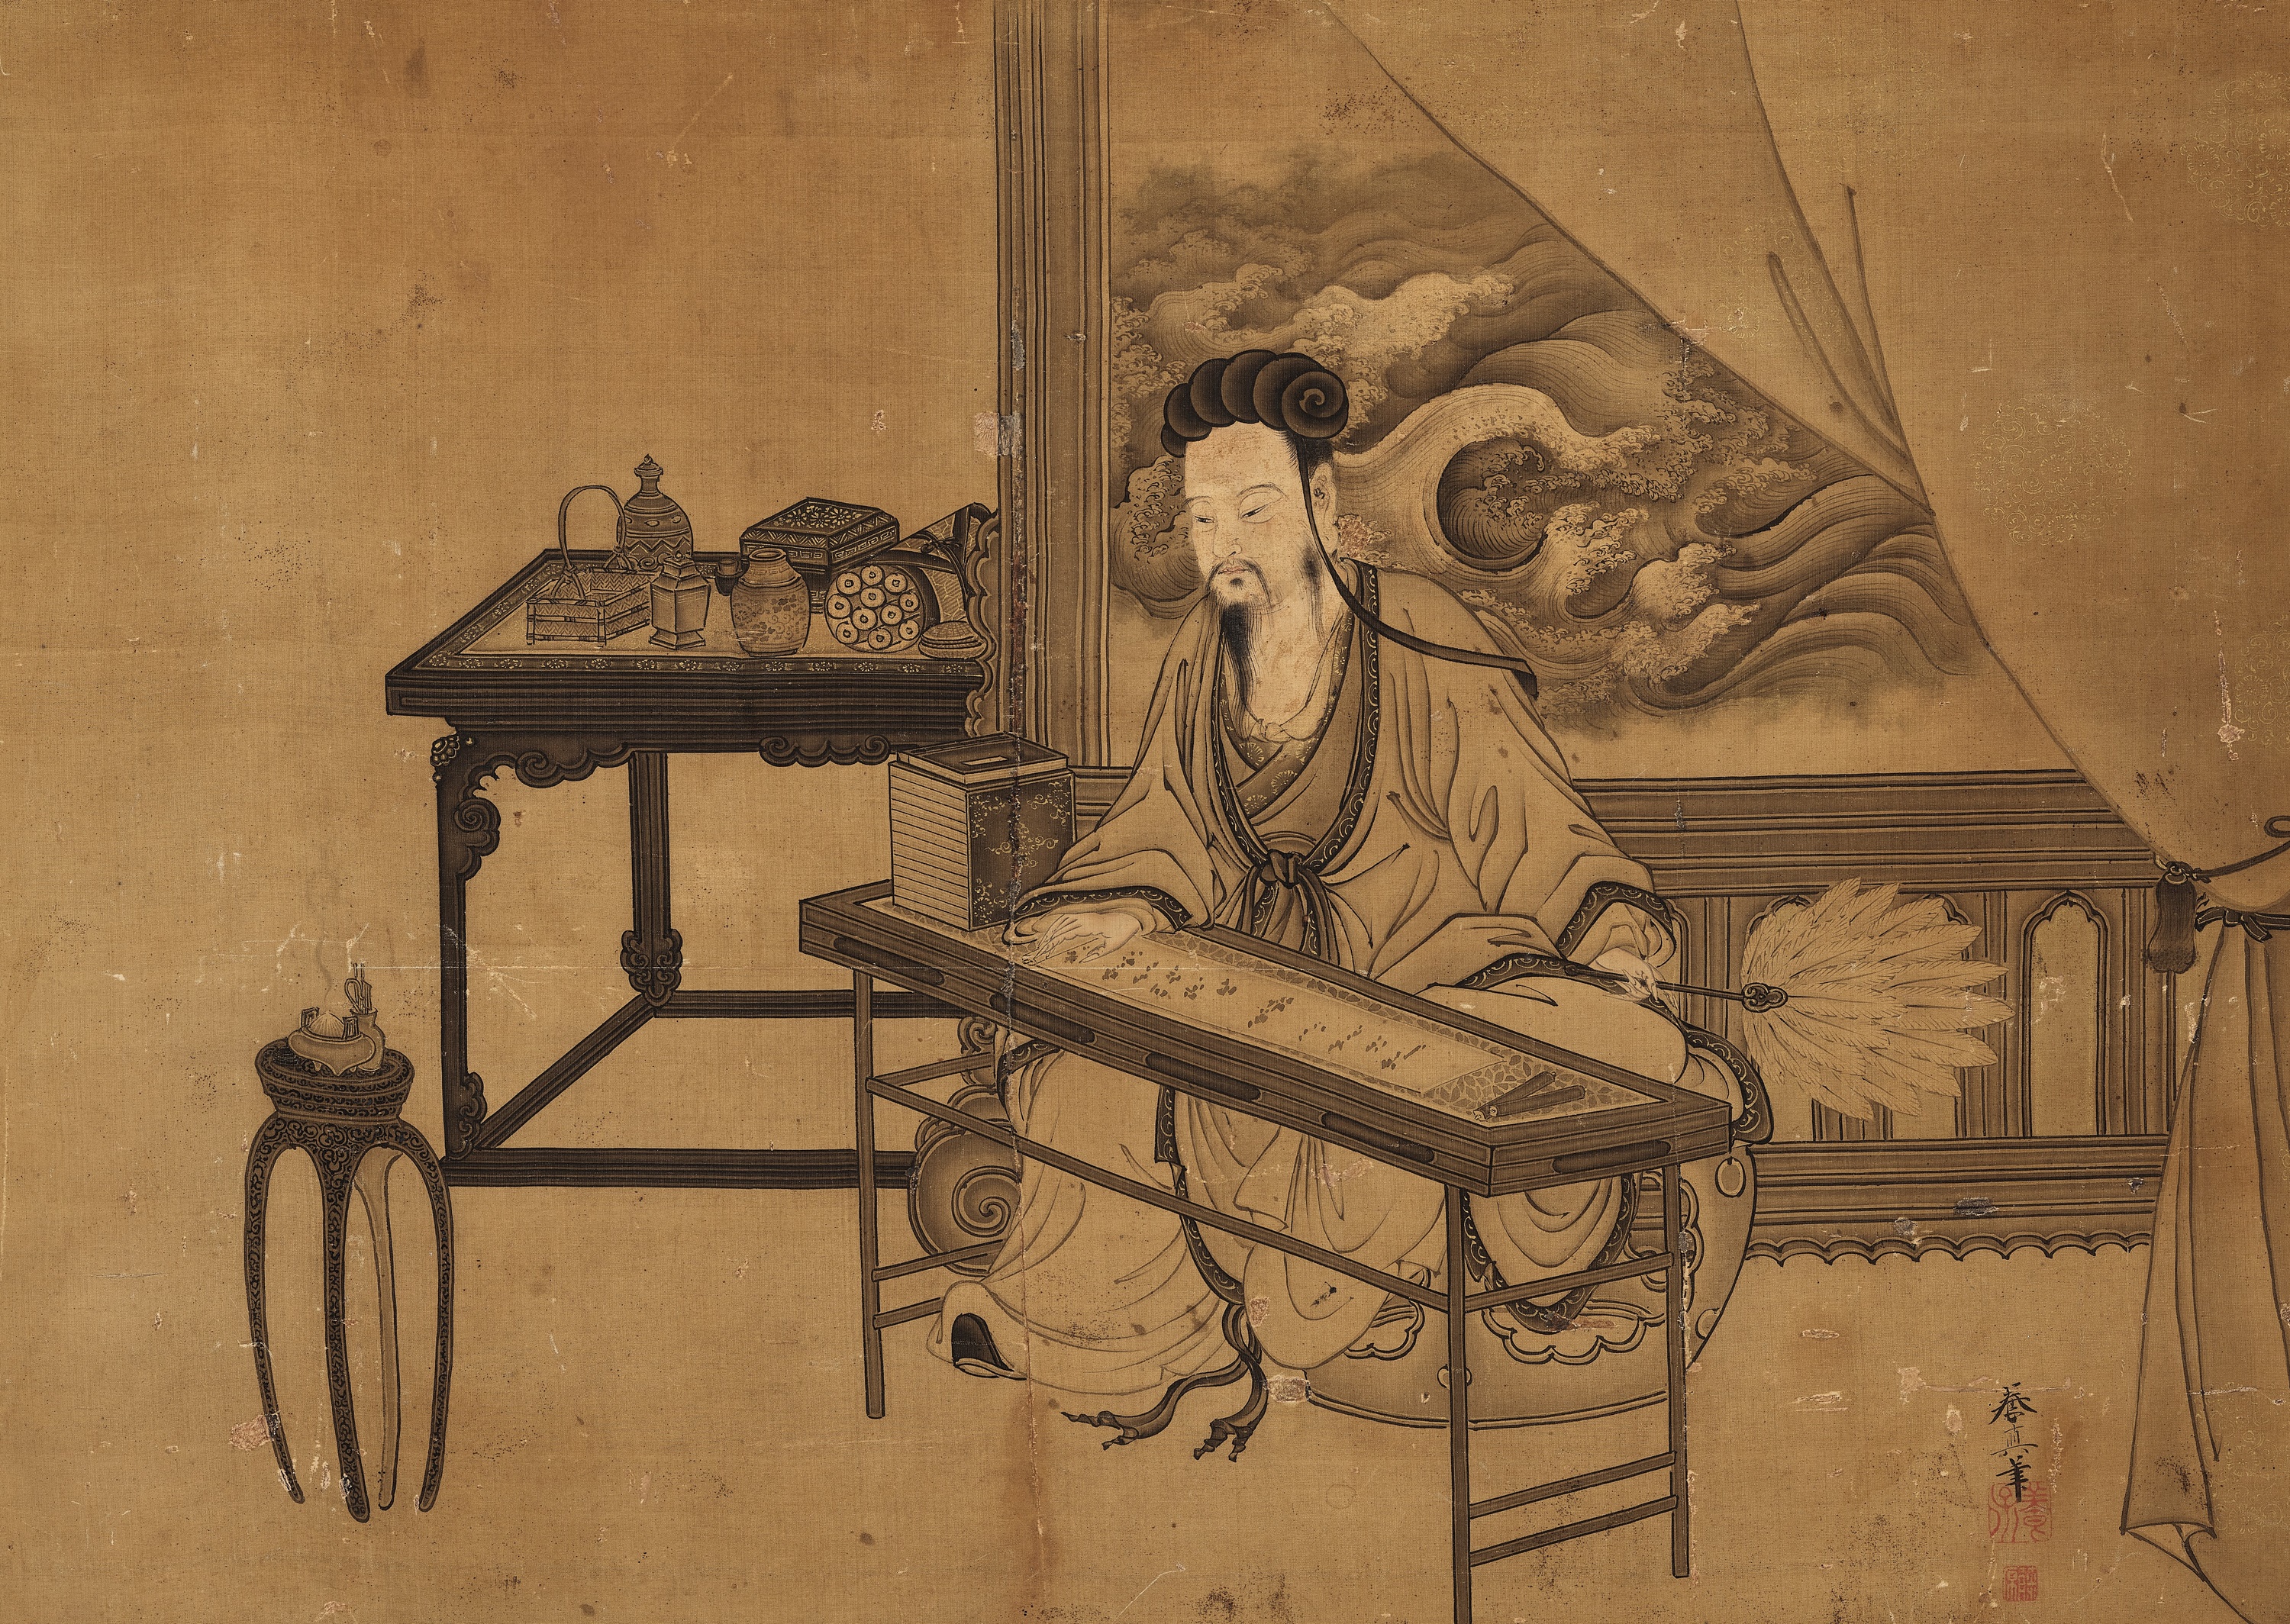 KOTO YOSHIN: A FINE KANO SCHOOL PAINTING OF 'SCHOLAR READING A SCROLL' - Image 2 of 8